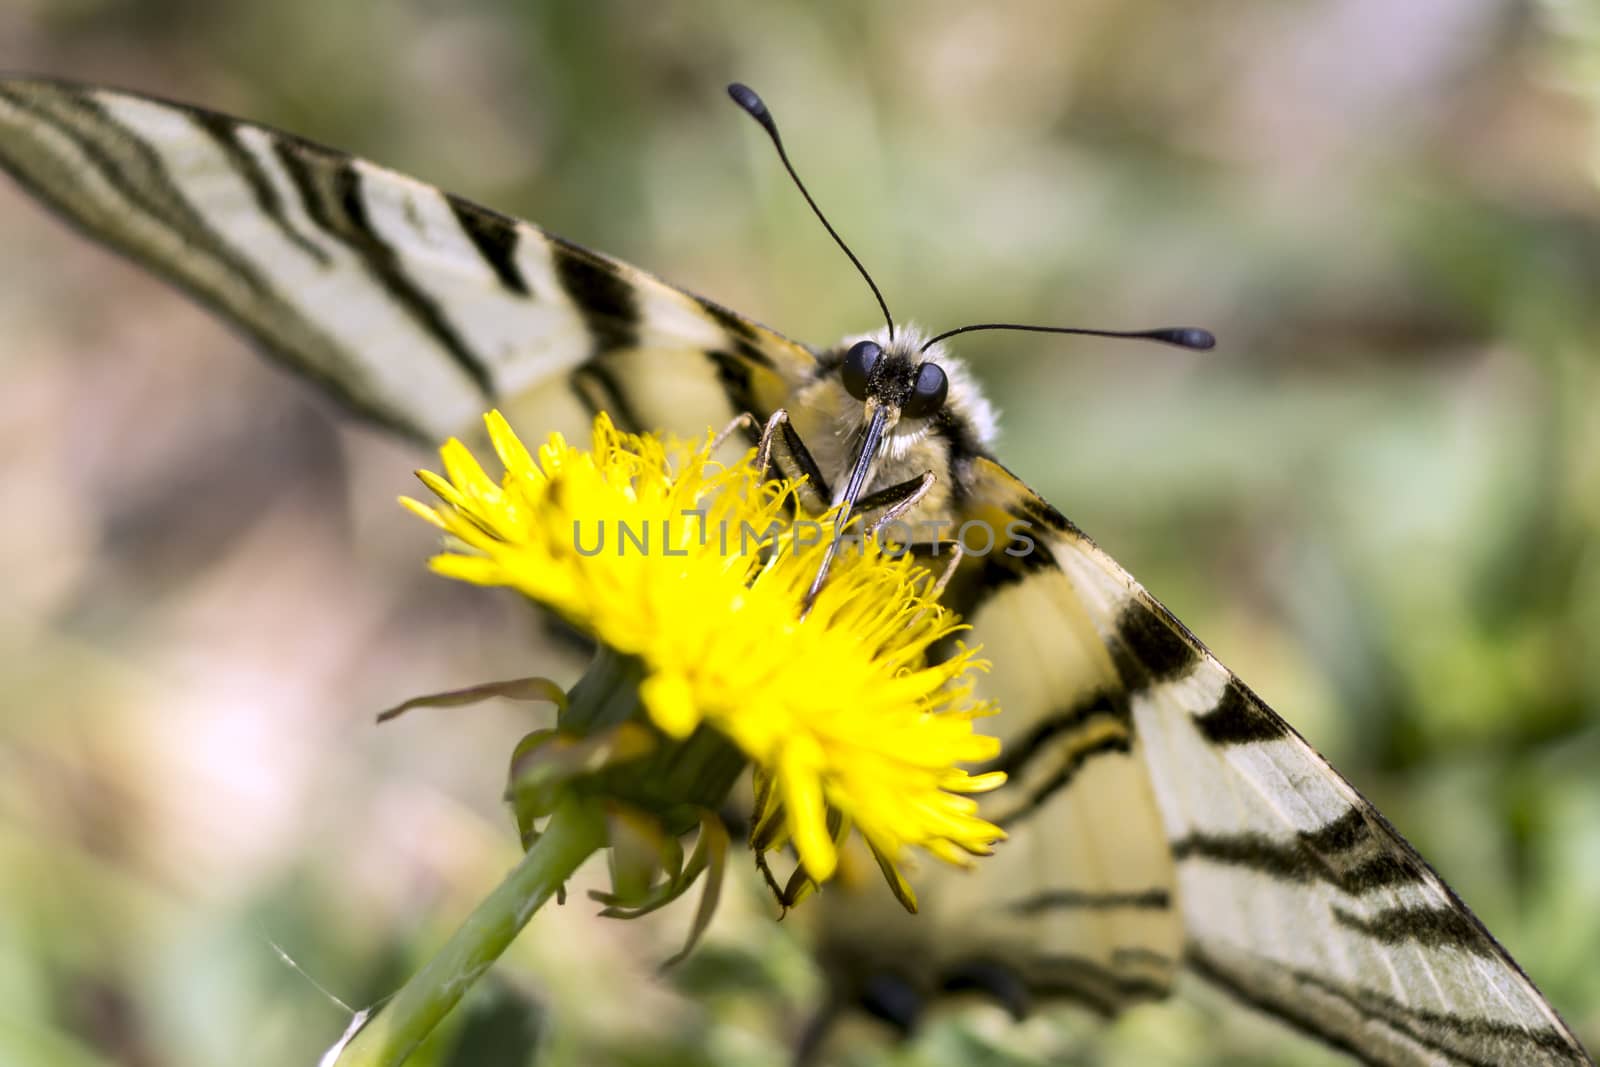 Butterfly sword (Iphiclides podalirius) by dadalia